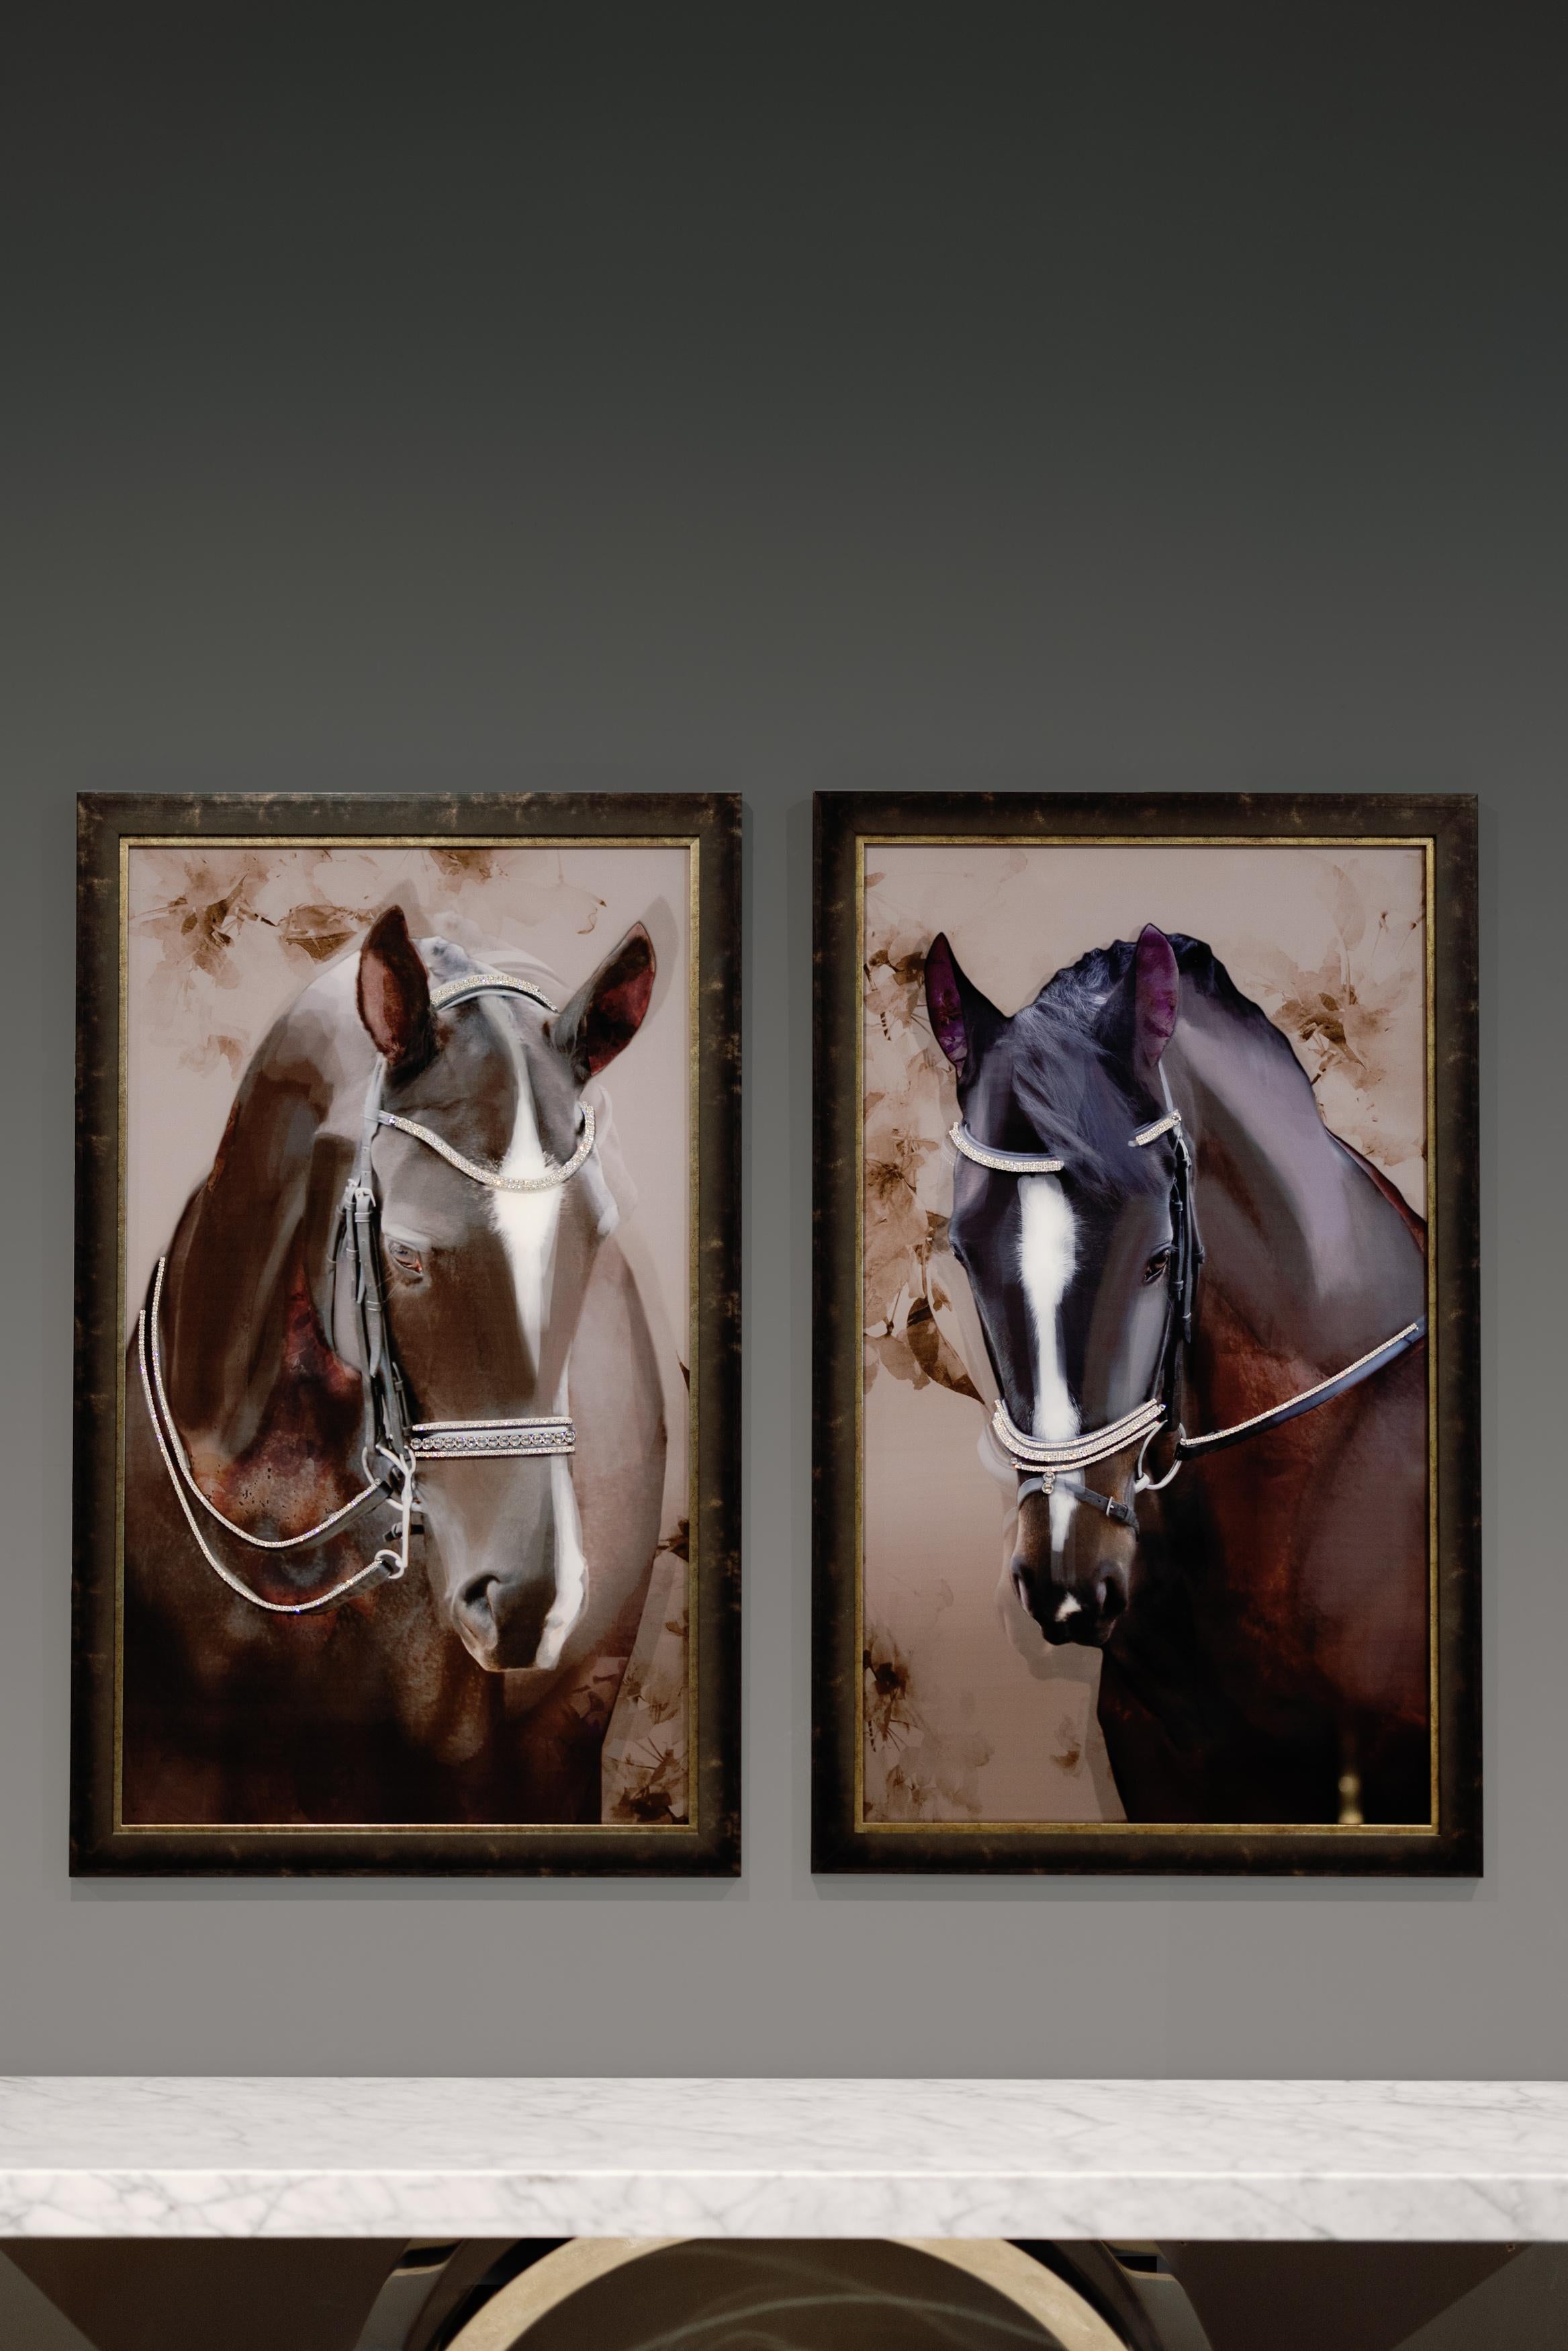 Lusitano Wall Art, Lusitanus Home Collection, Handcrafted in Portugal - Europe by Lusitanus Home.

Wall art with exclusive Greenapple design printed on glass with handmade Swarovski® crystals. Frame made of pine wood. An exquisite and sophisticated